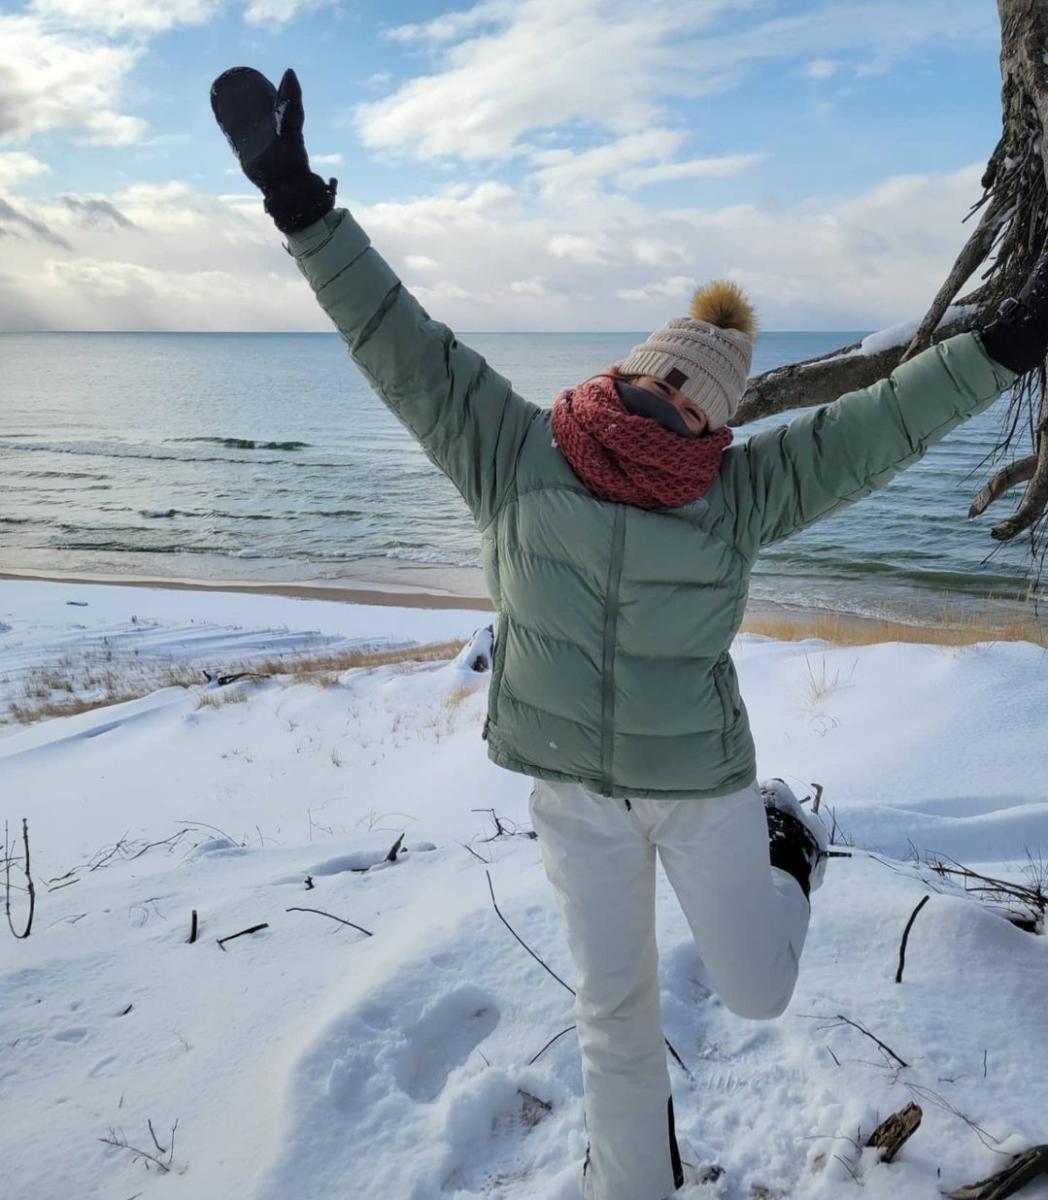 woman expresses joy while standing on snow covered hill overlooking lake michigan. she wears white snowpants, mint winter coat, burgundy scarf around her face and white knit hat.